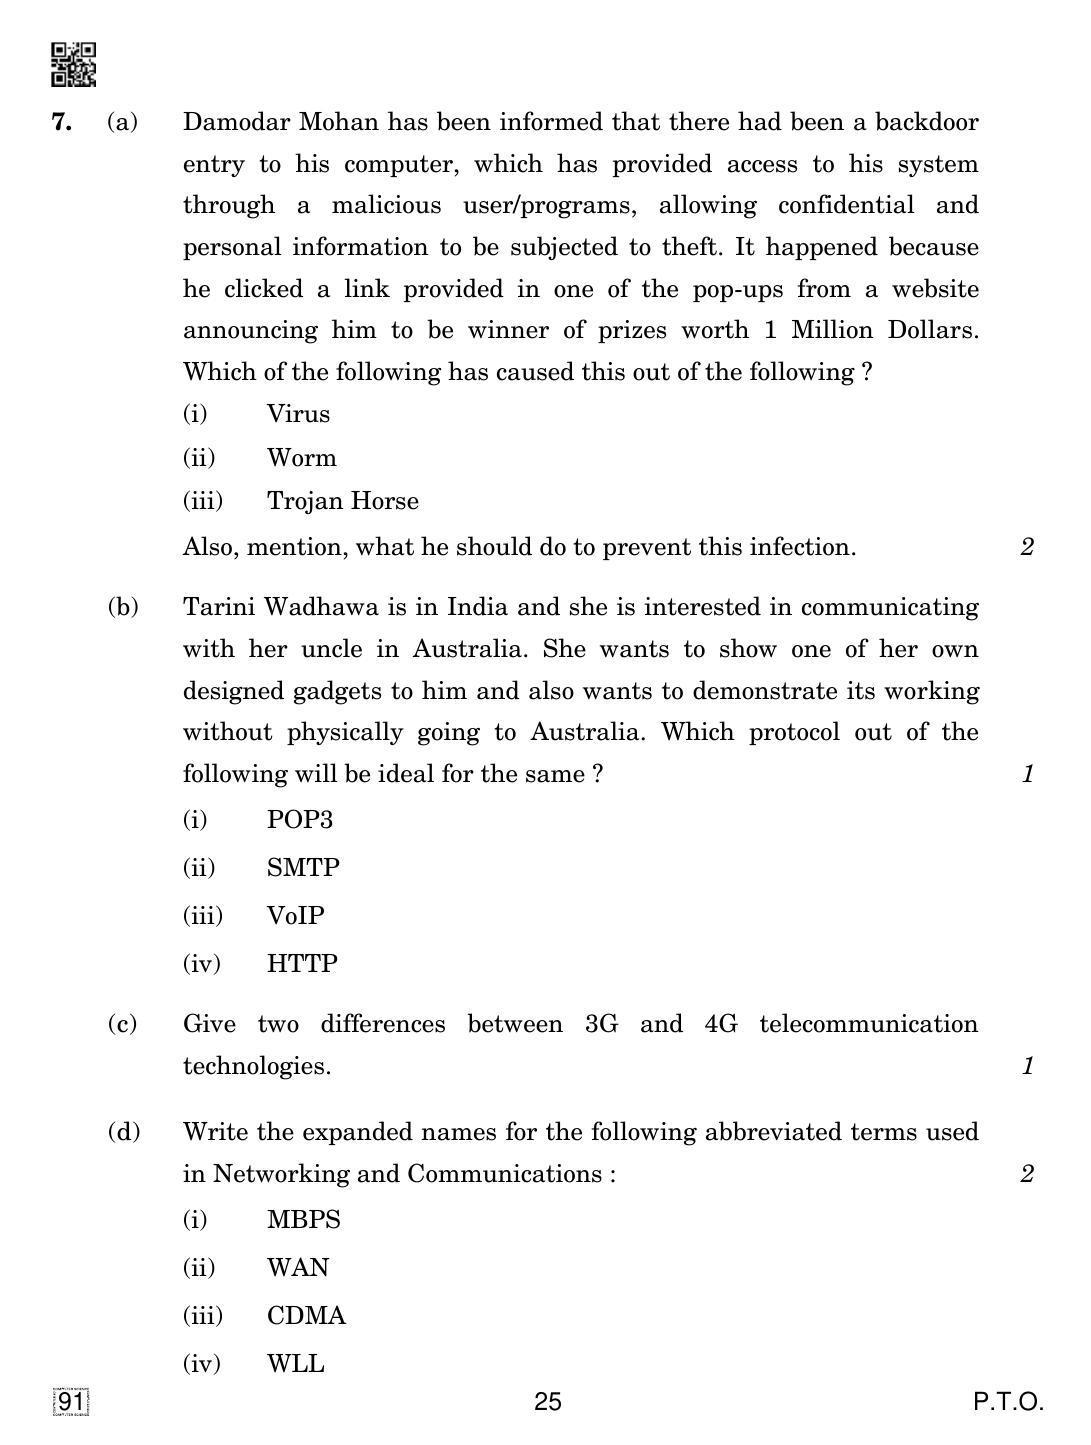 CBSE Class 12 91 Computer Science 2019 Question Paper - Page 25